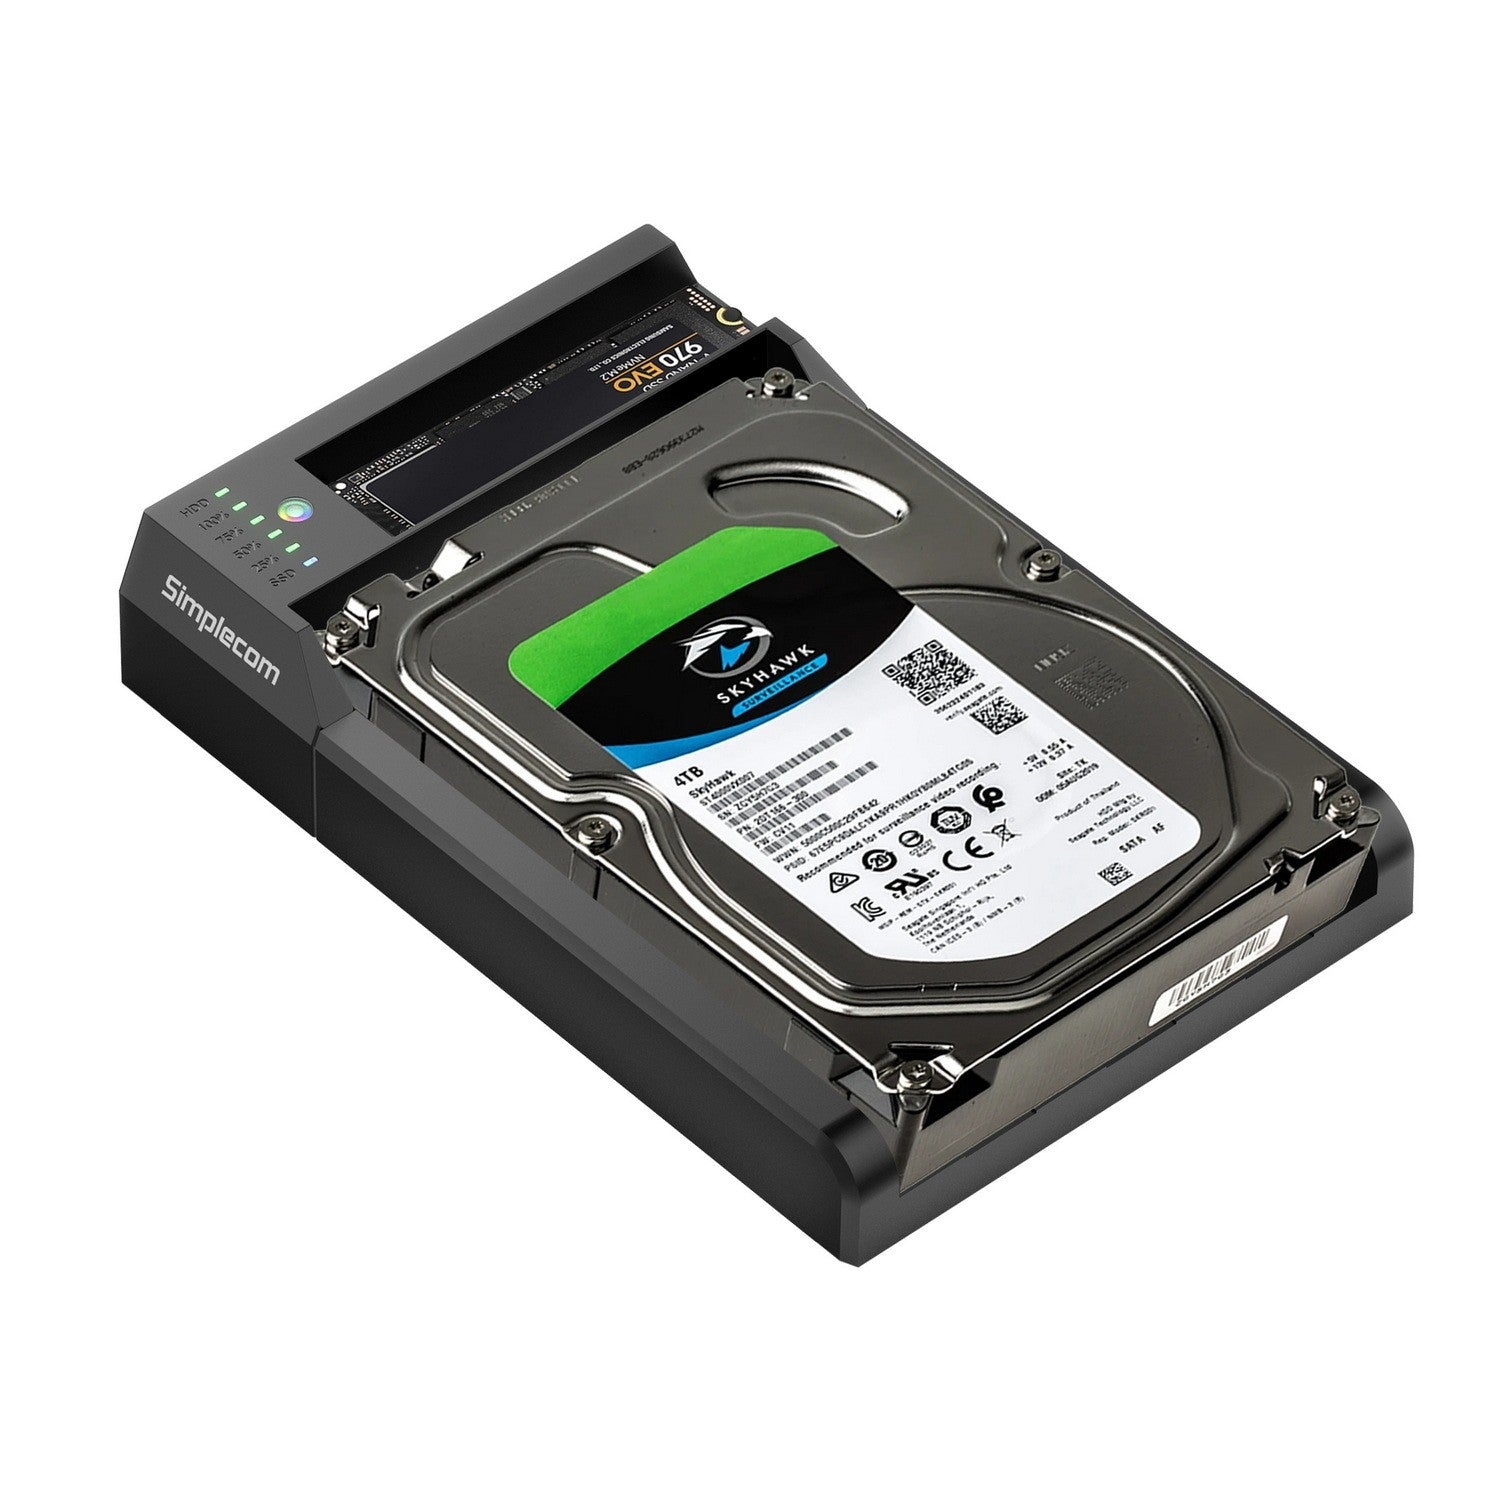 Simplecom SD570 NVMe M.2 + SATA HDD and SSD Dual Bay Docking Station USB 3.2 Gen 2 10Gbps Offline Clone [PC]